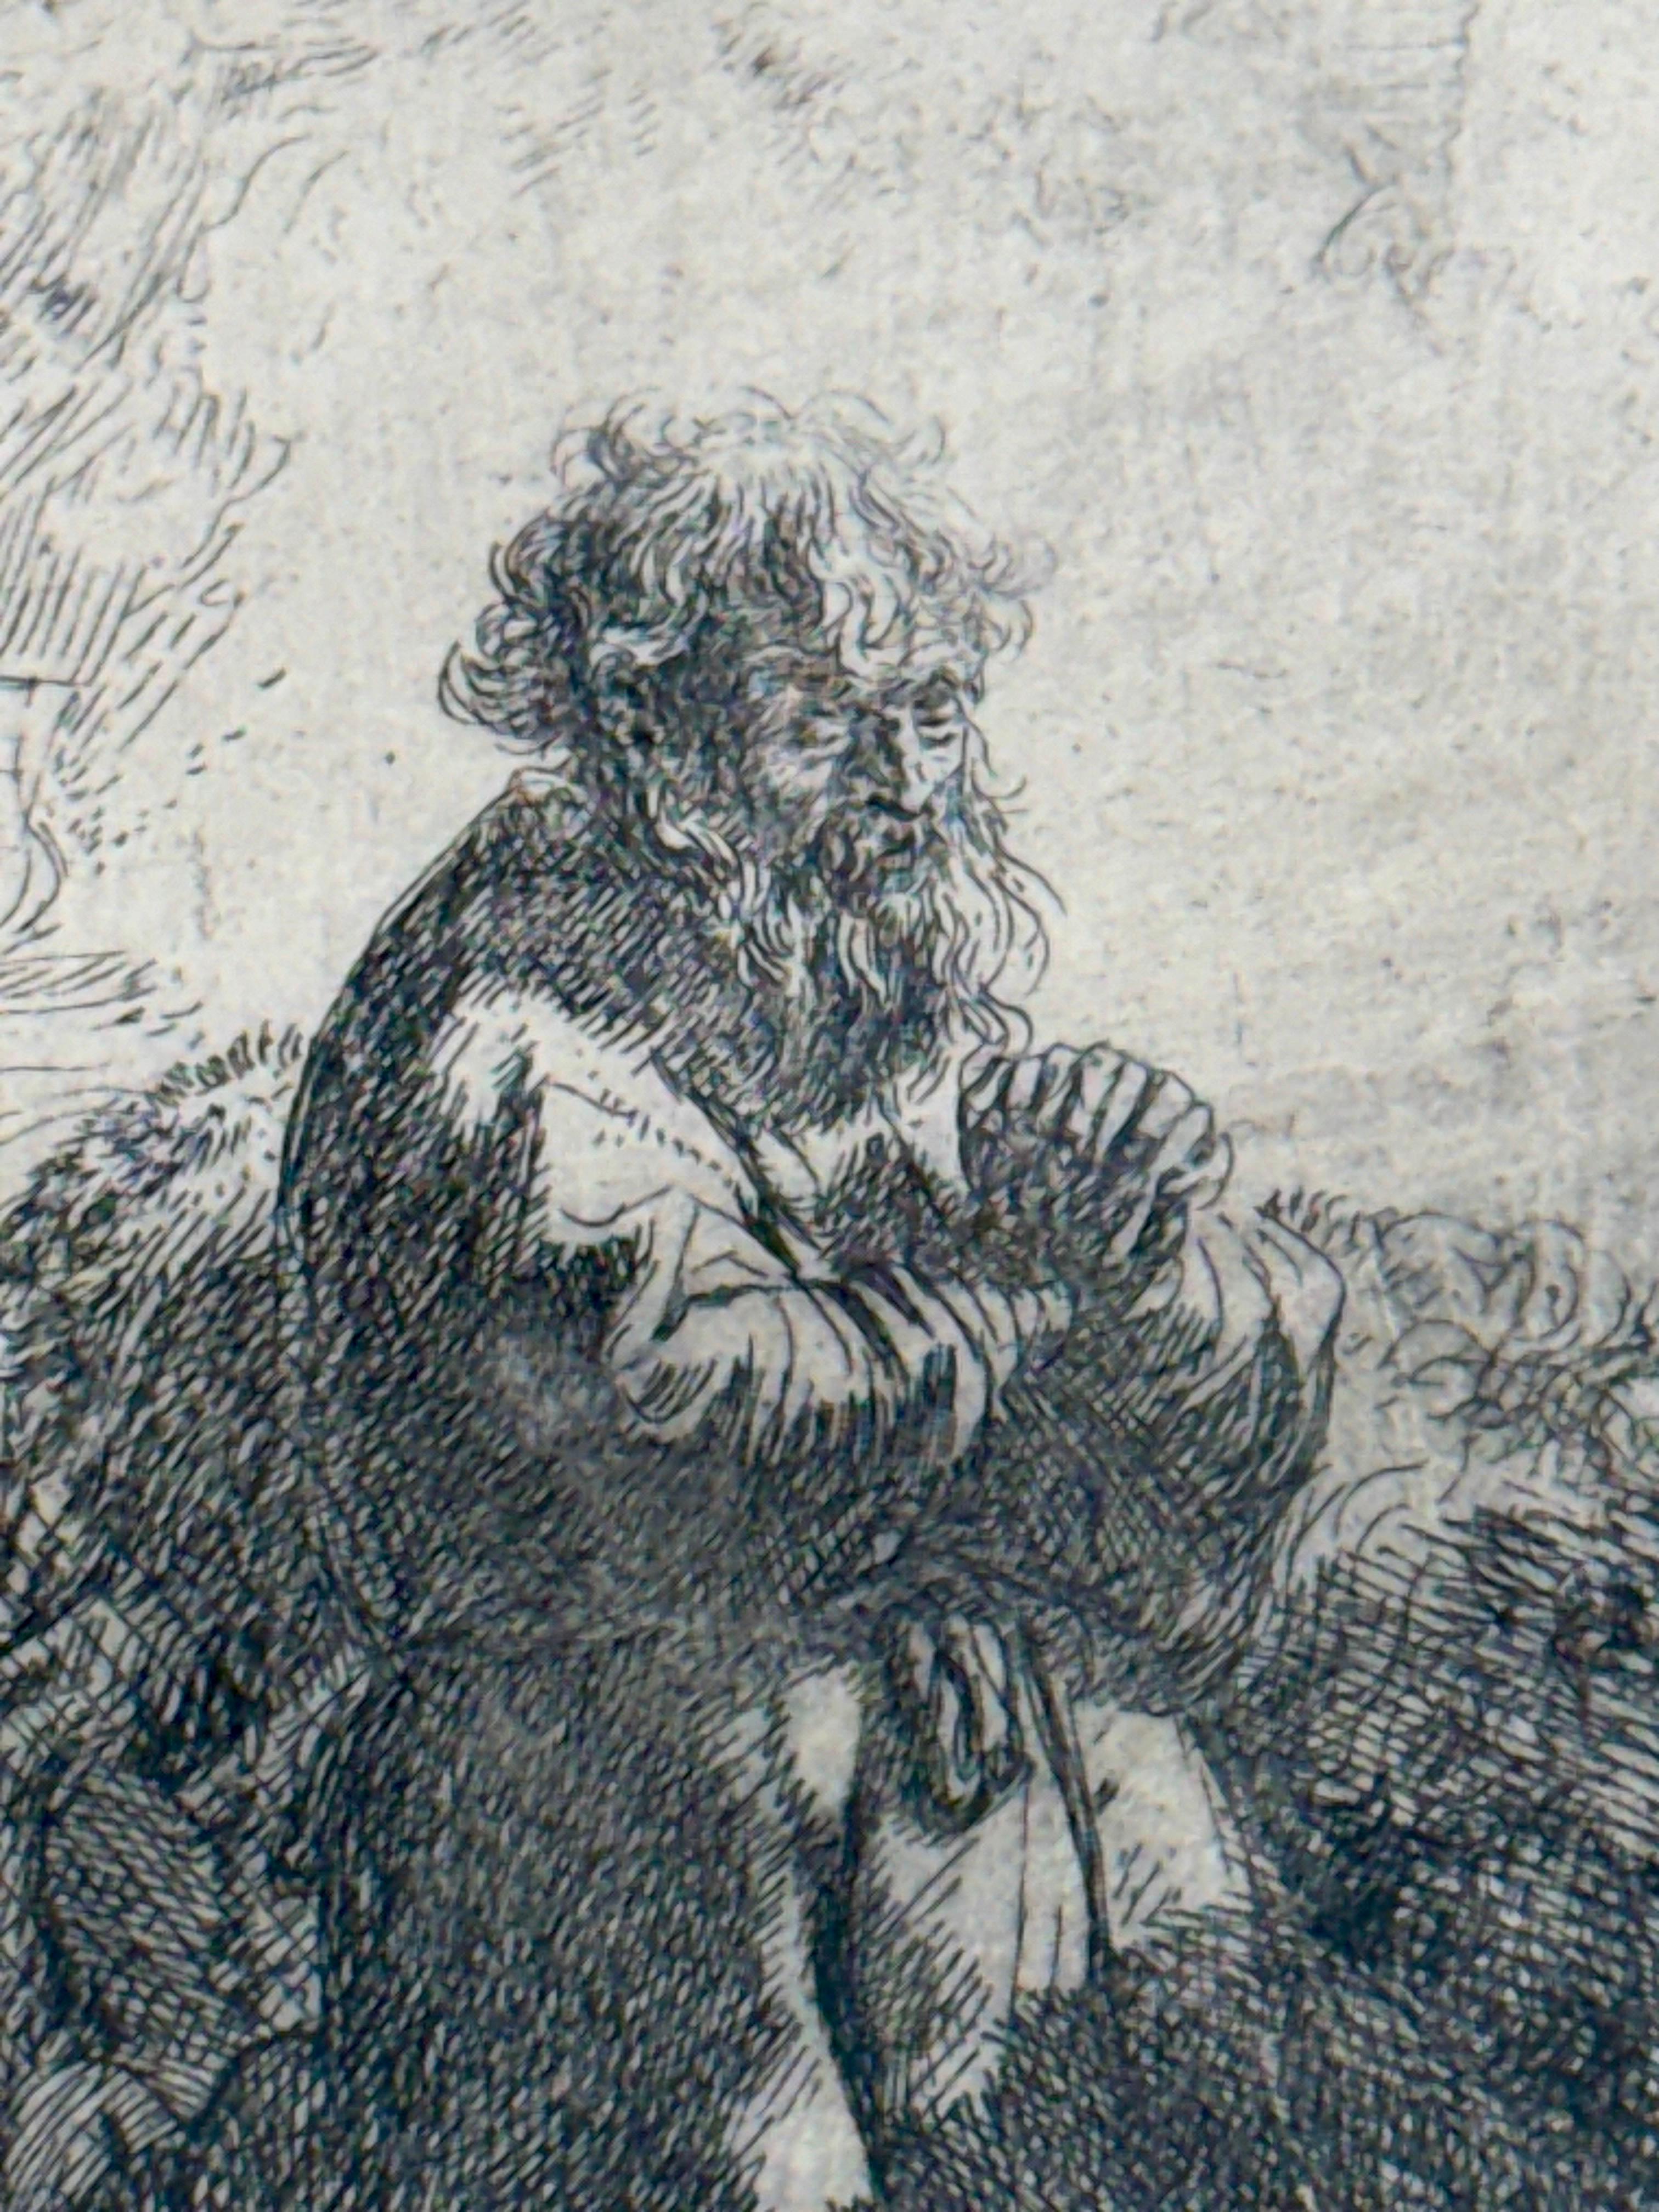 Baroque Rembrandt St. Jerome Kneeling in Prayer Signed Etching Framed, Early 17th C